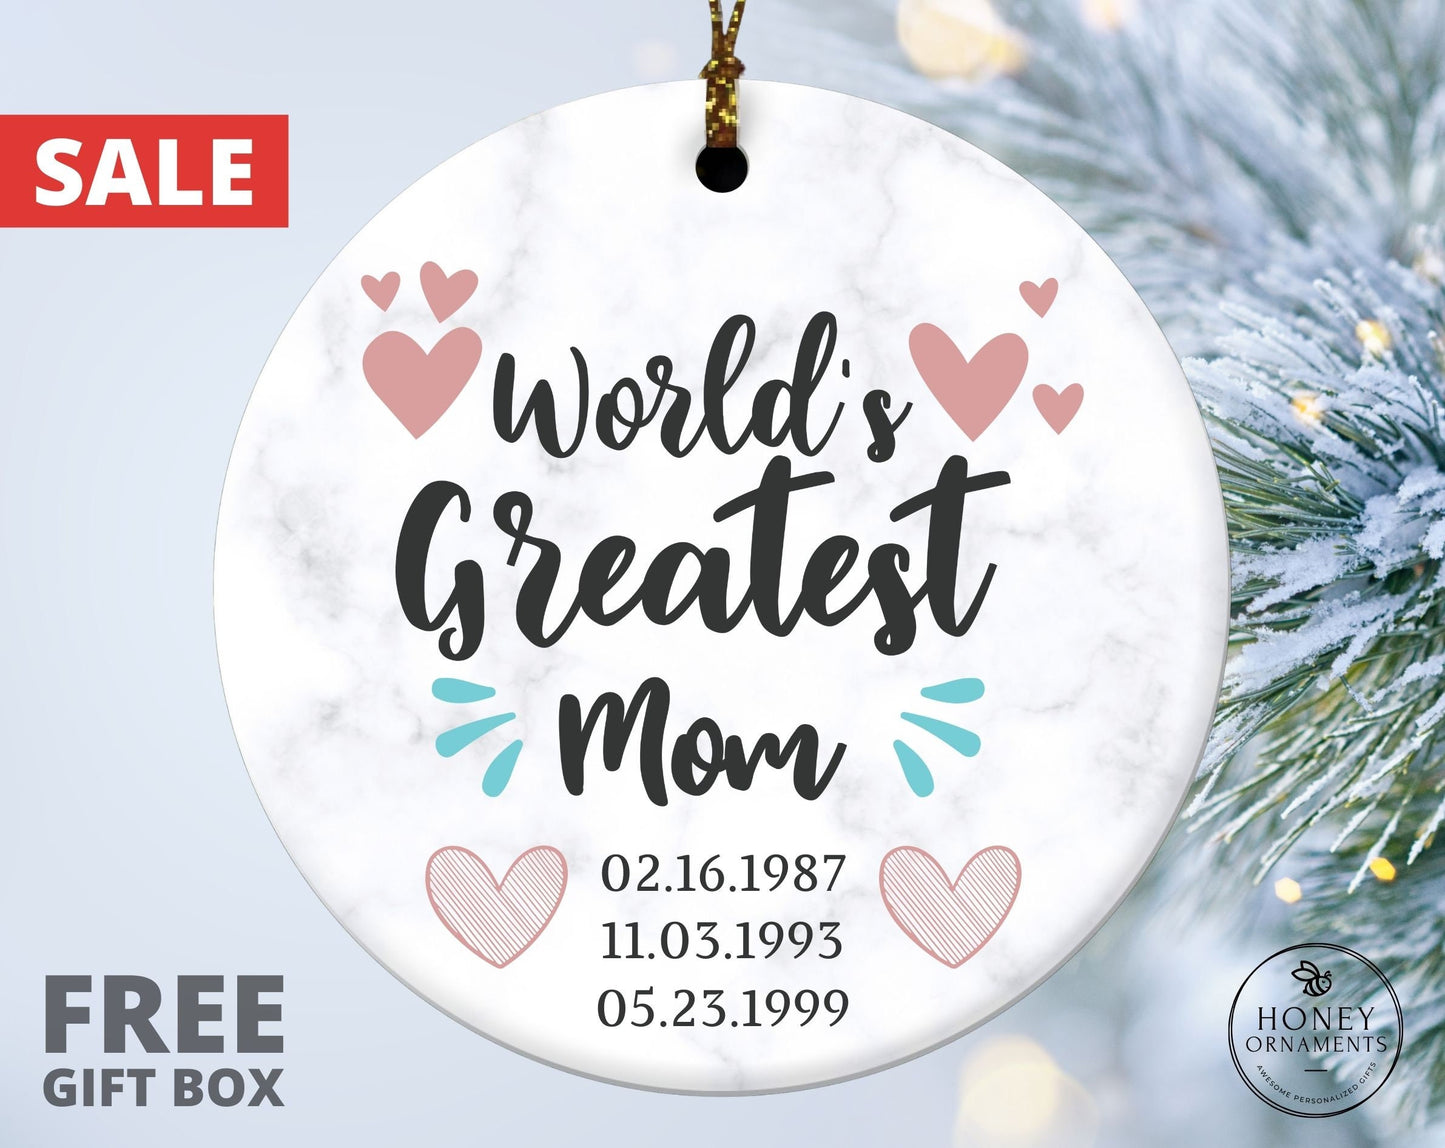 World's Greatest Mom Ornament - Personalized Ornament Gift for Mom - Custom Gift for Mom - Mothers Day Gift from Son - Mother in Law Gift